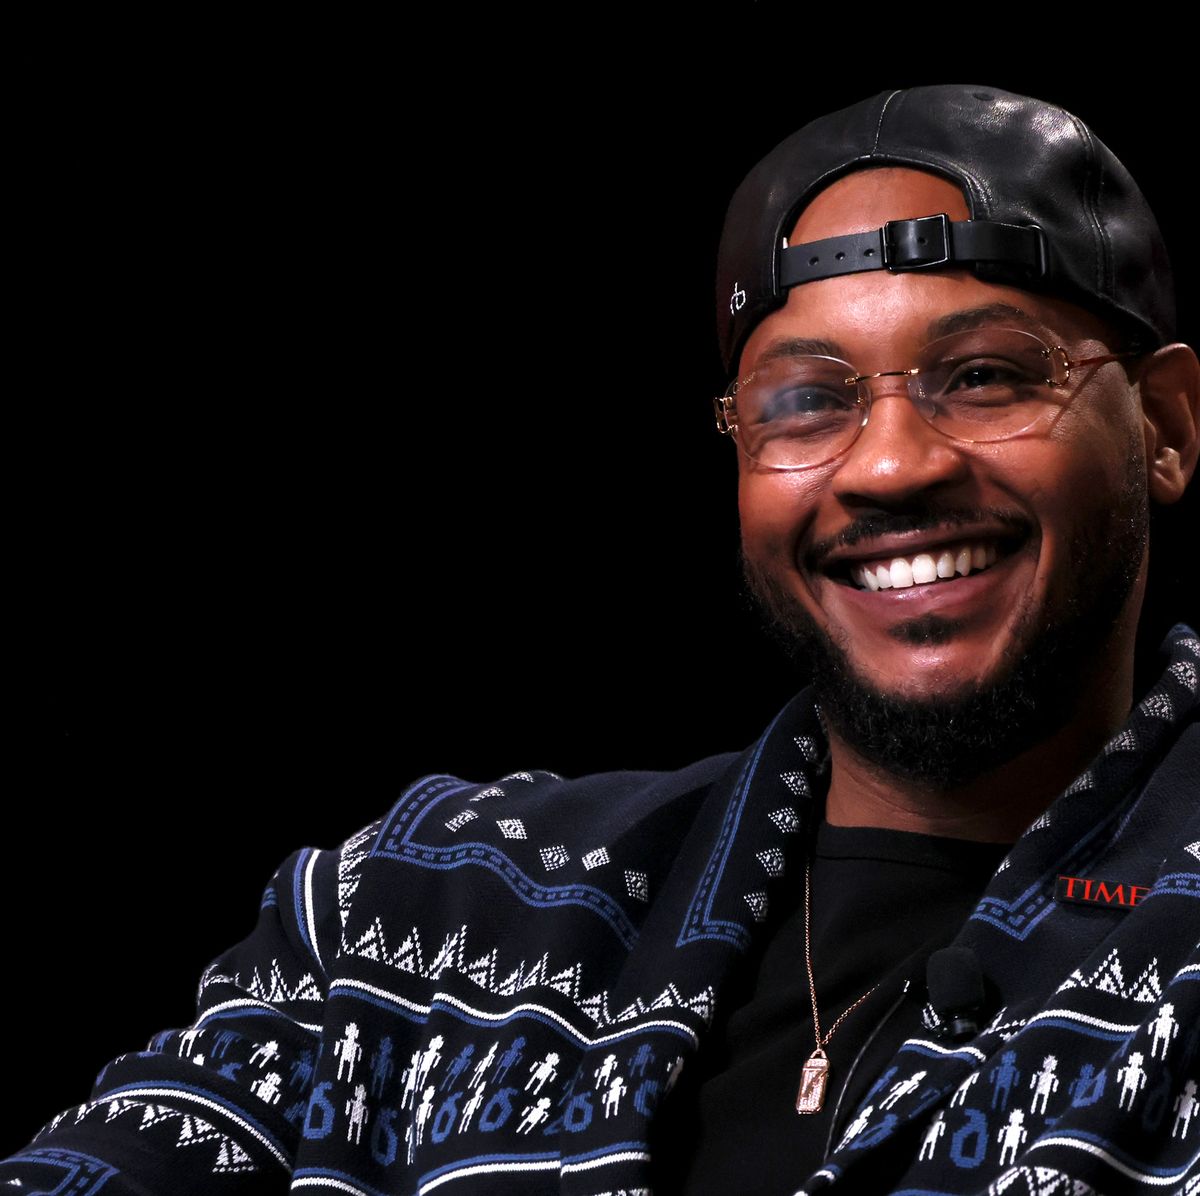 Carmelo and Lala Anthony Celebrate New Year's Together